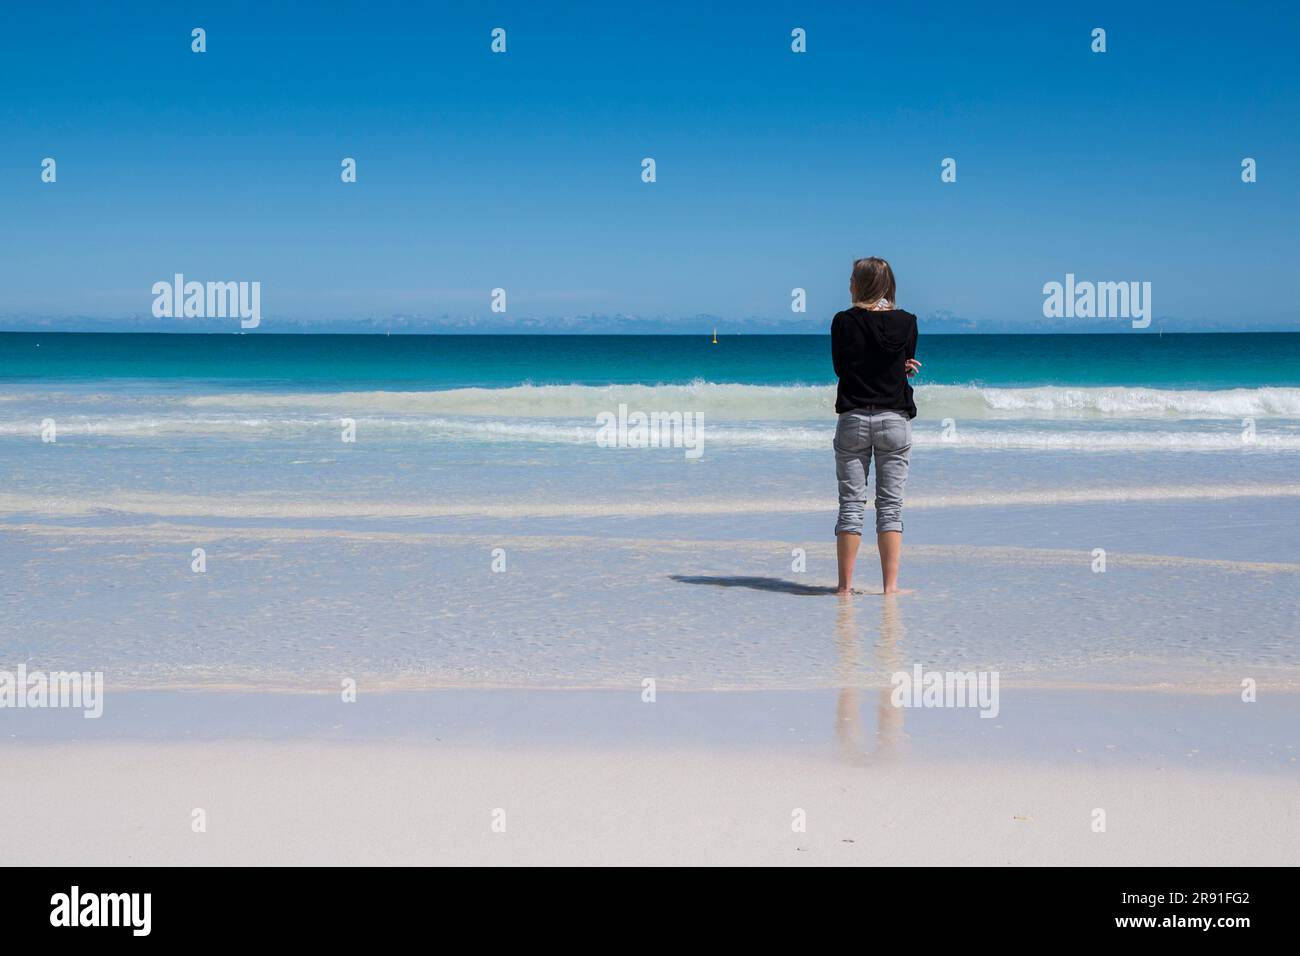 A woman with trousers rolled up enjoys the water and sand on Scarborough Beach in Perth Australia Stock Photo